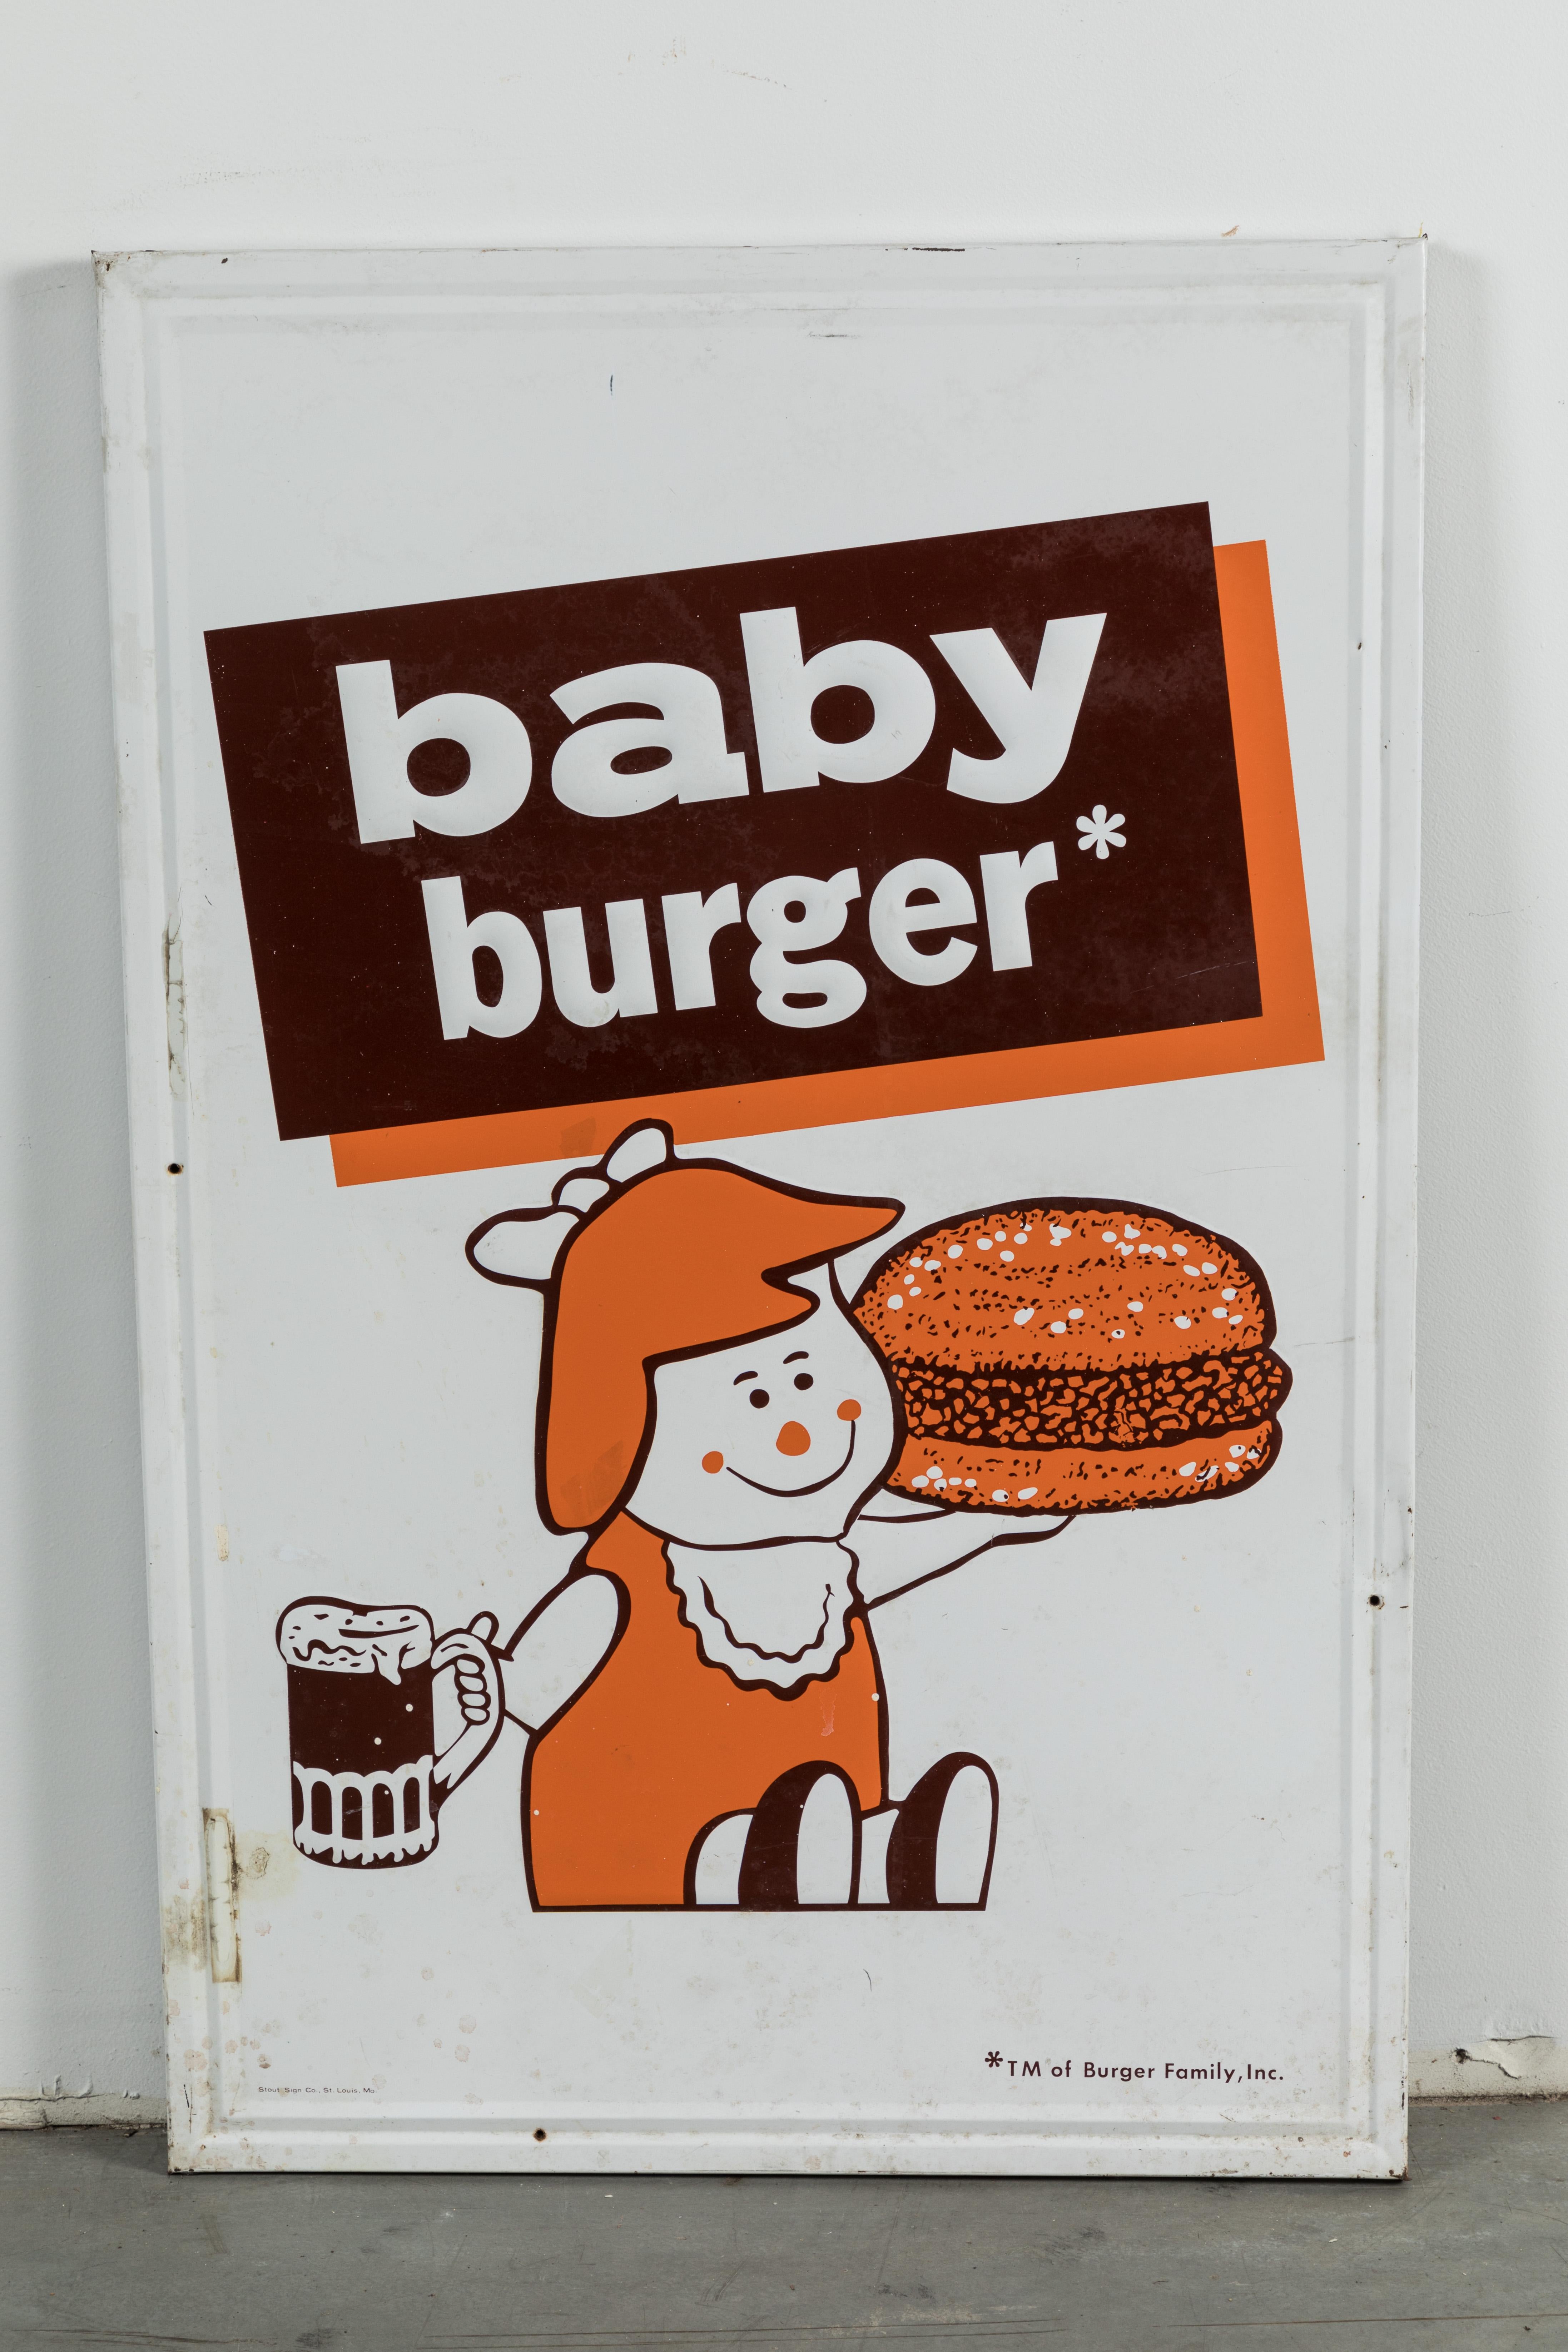 American Collection of Three A&W Drive-In Rootbeer Burger Signs